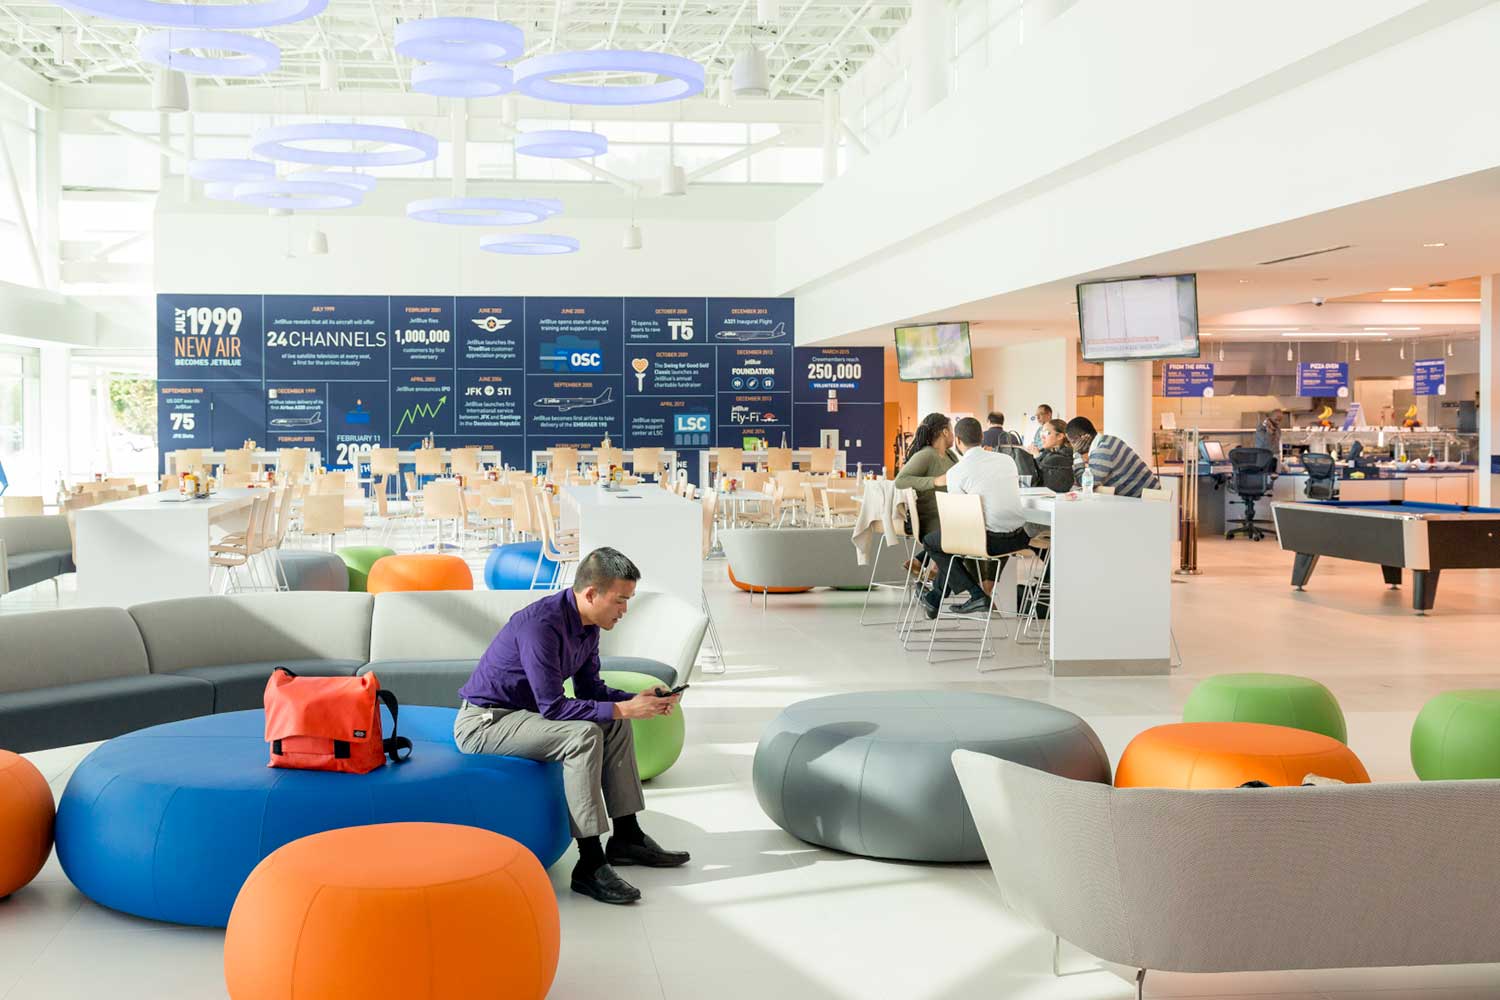 Lobby with round blue/gray/green/orange seating and people gathered